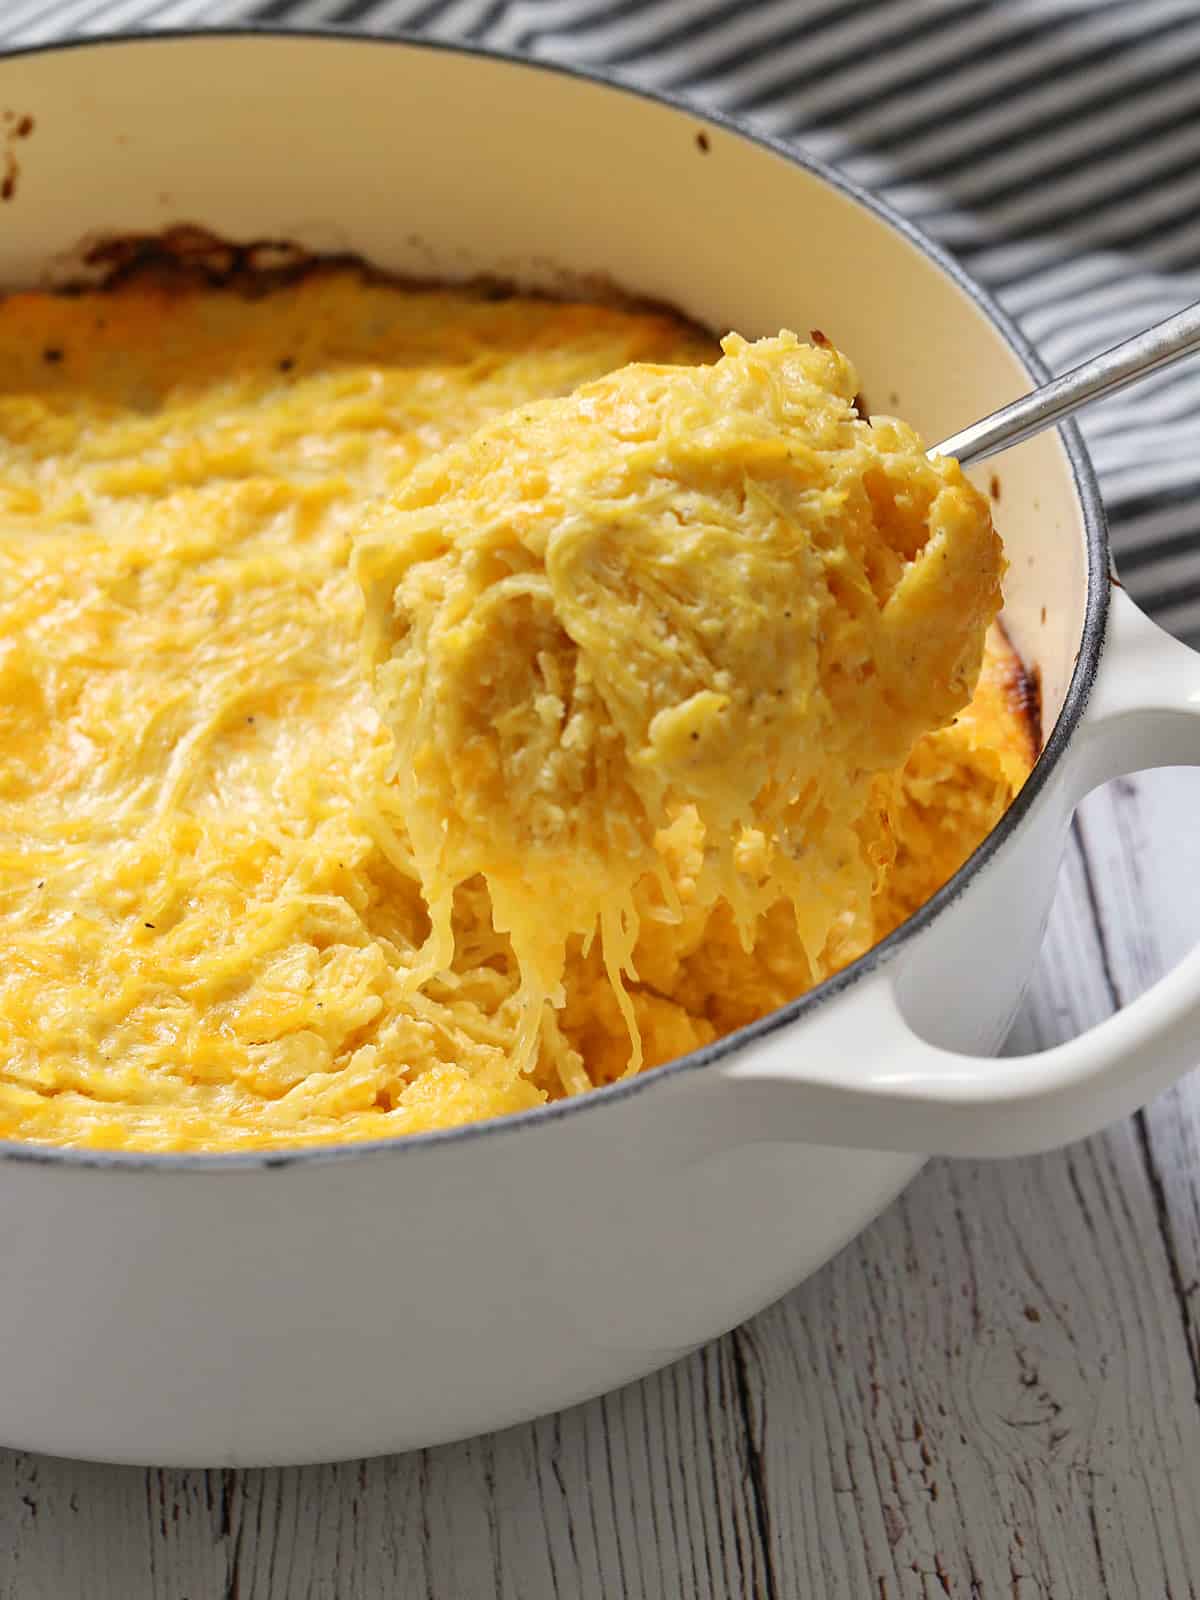 Spaghetti squash casserole is scooped out of the baking dish.